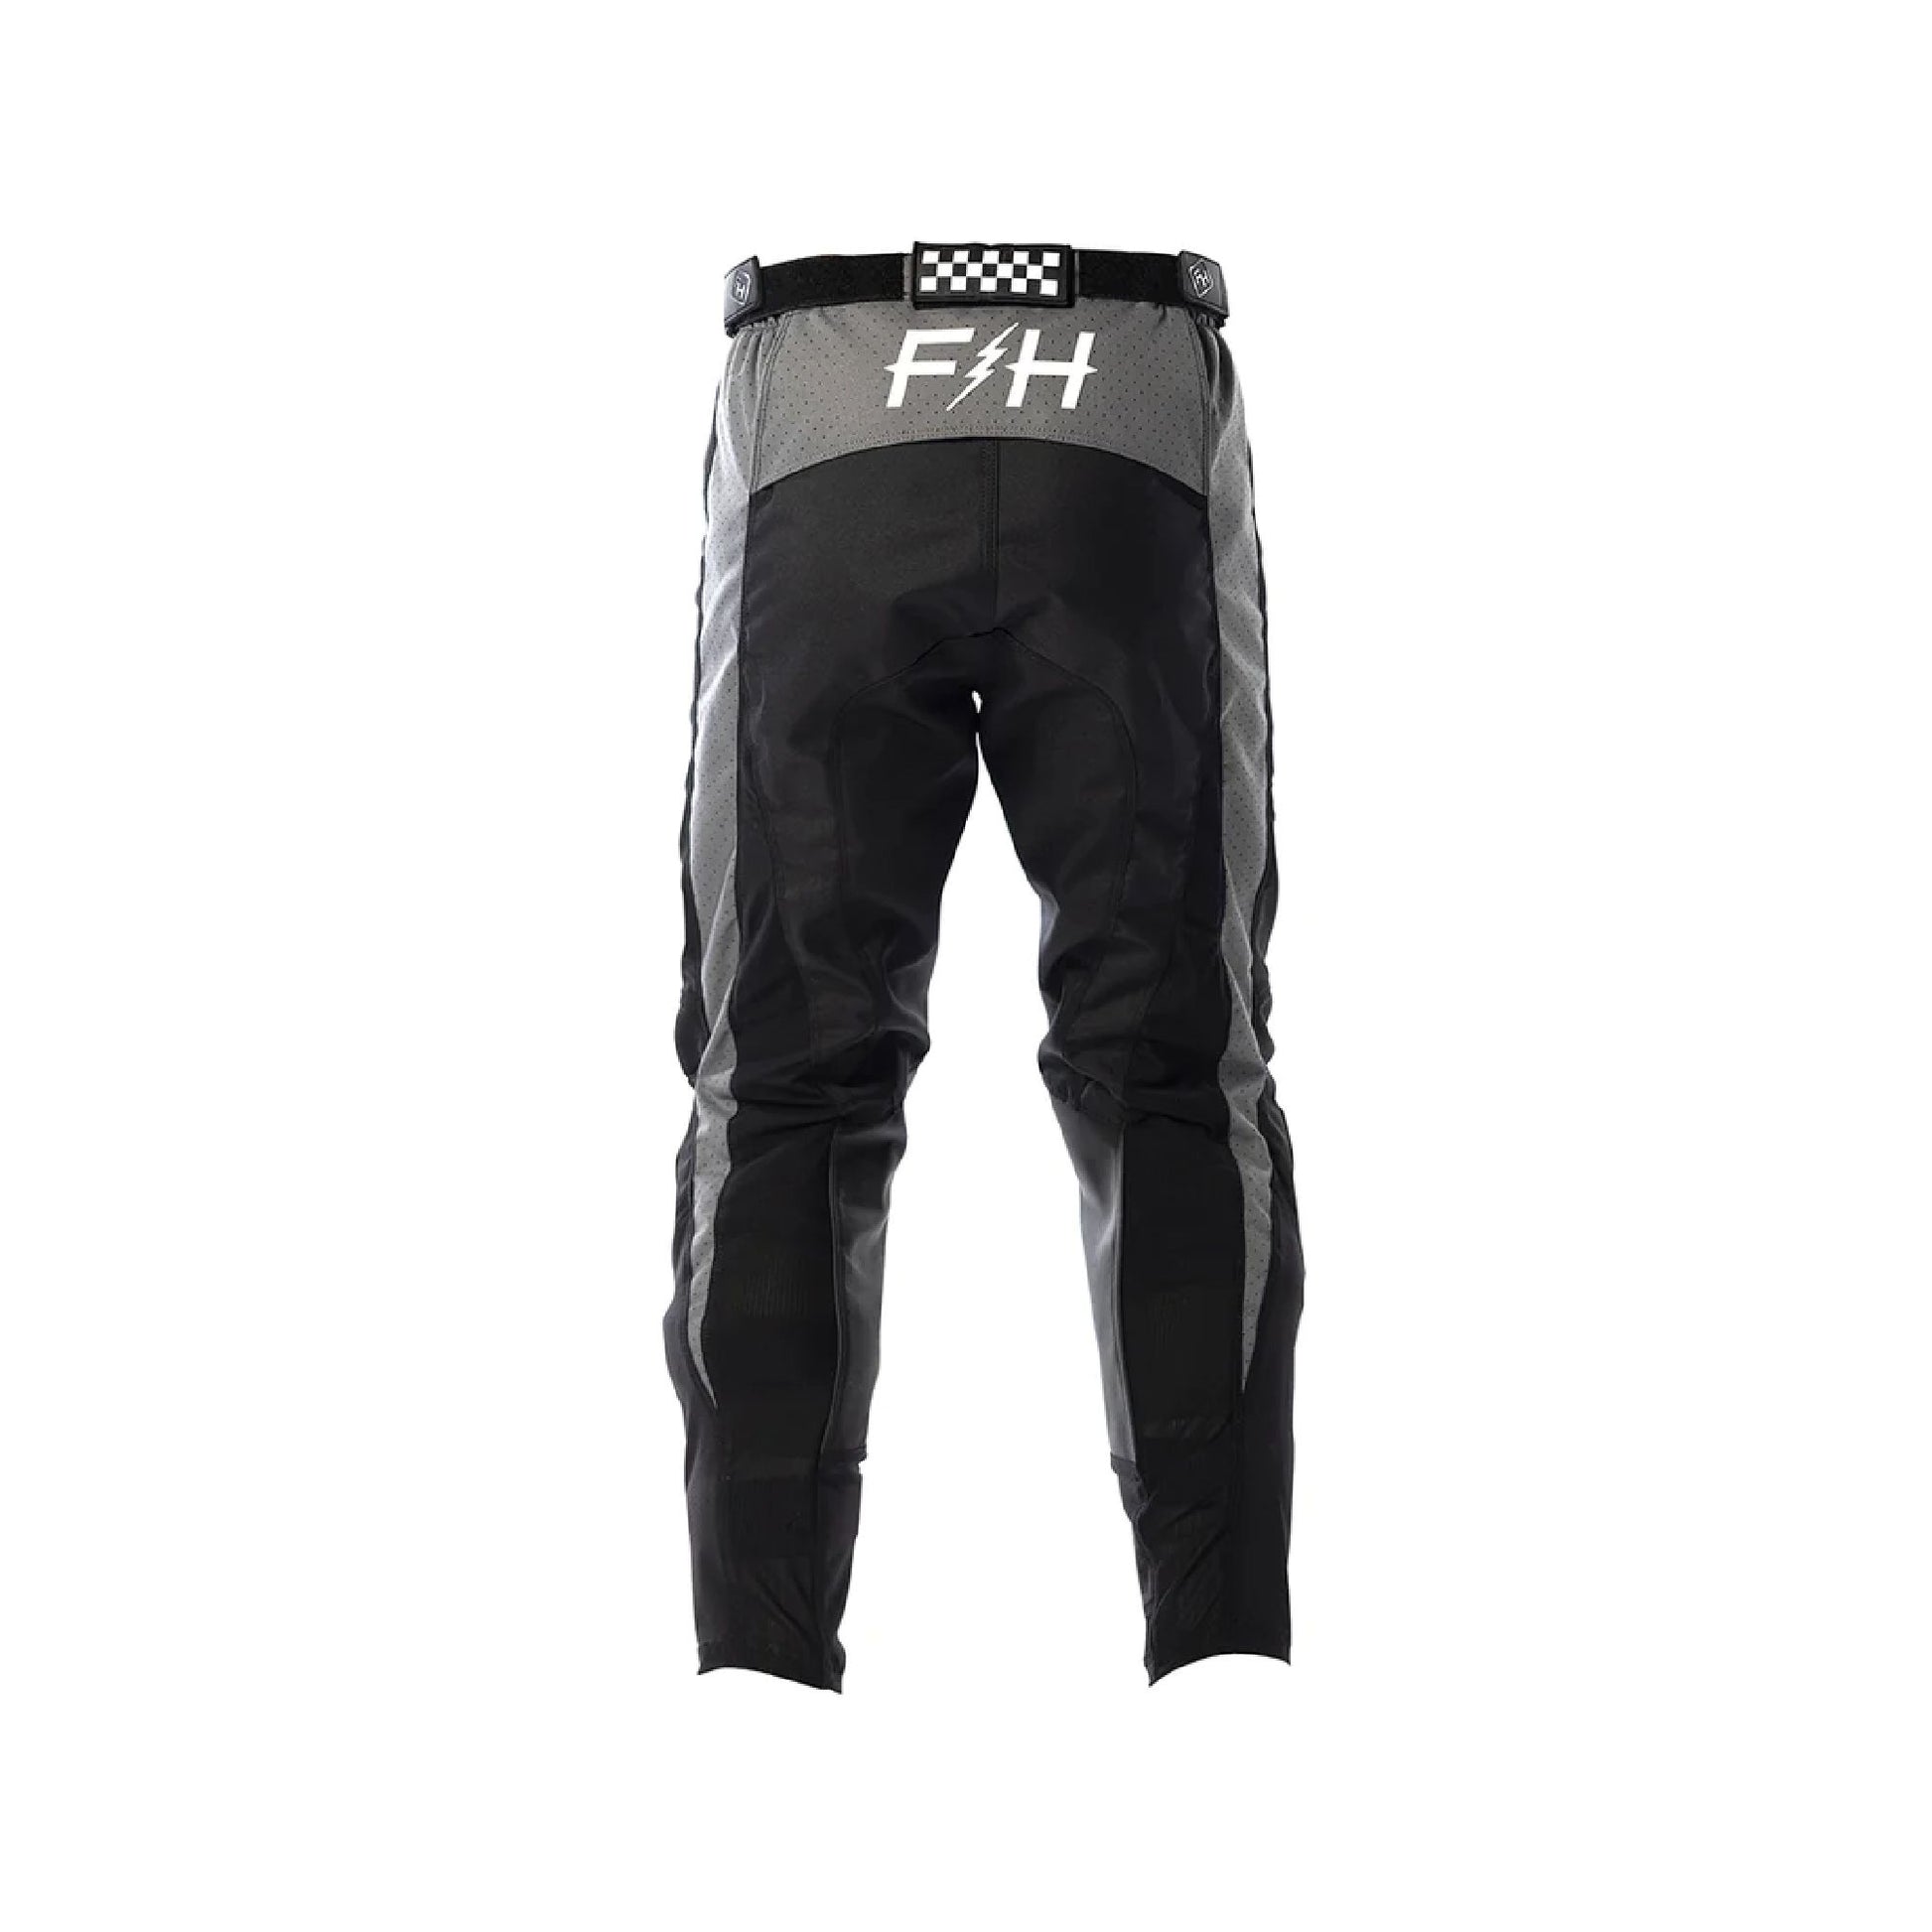 Fasthouse Youth Speed Style Pants Black Bike Pants